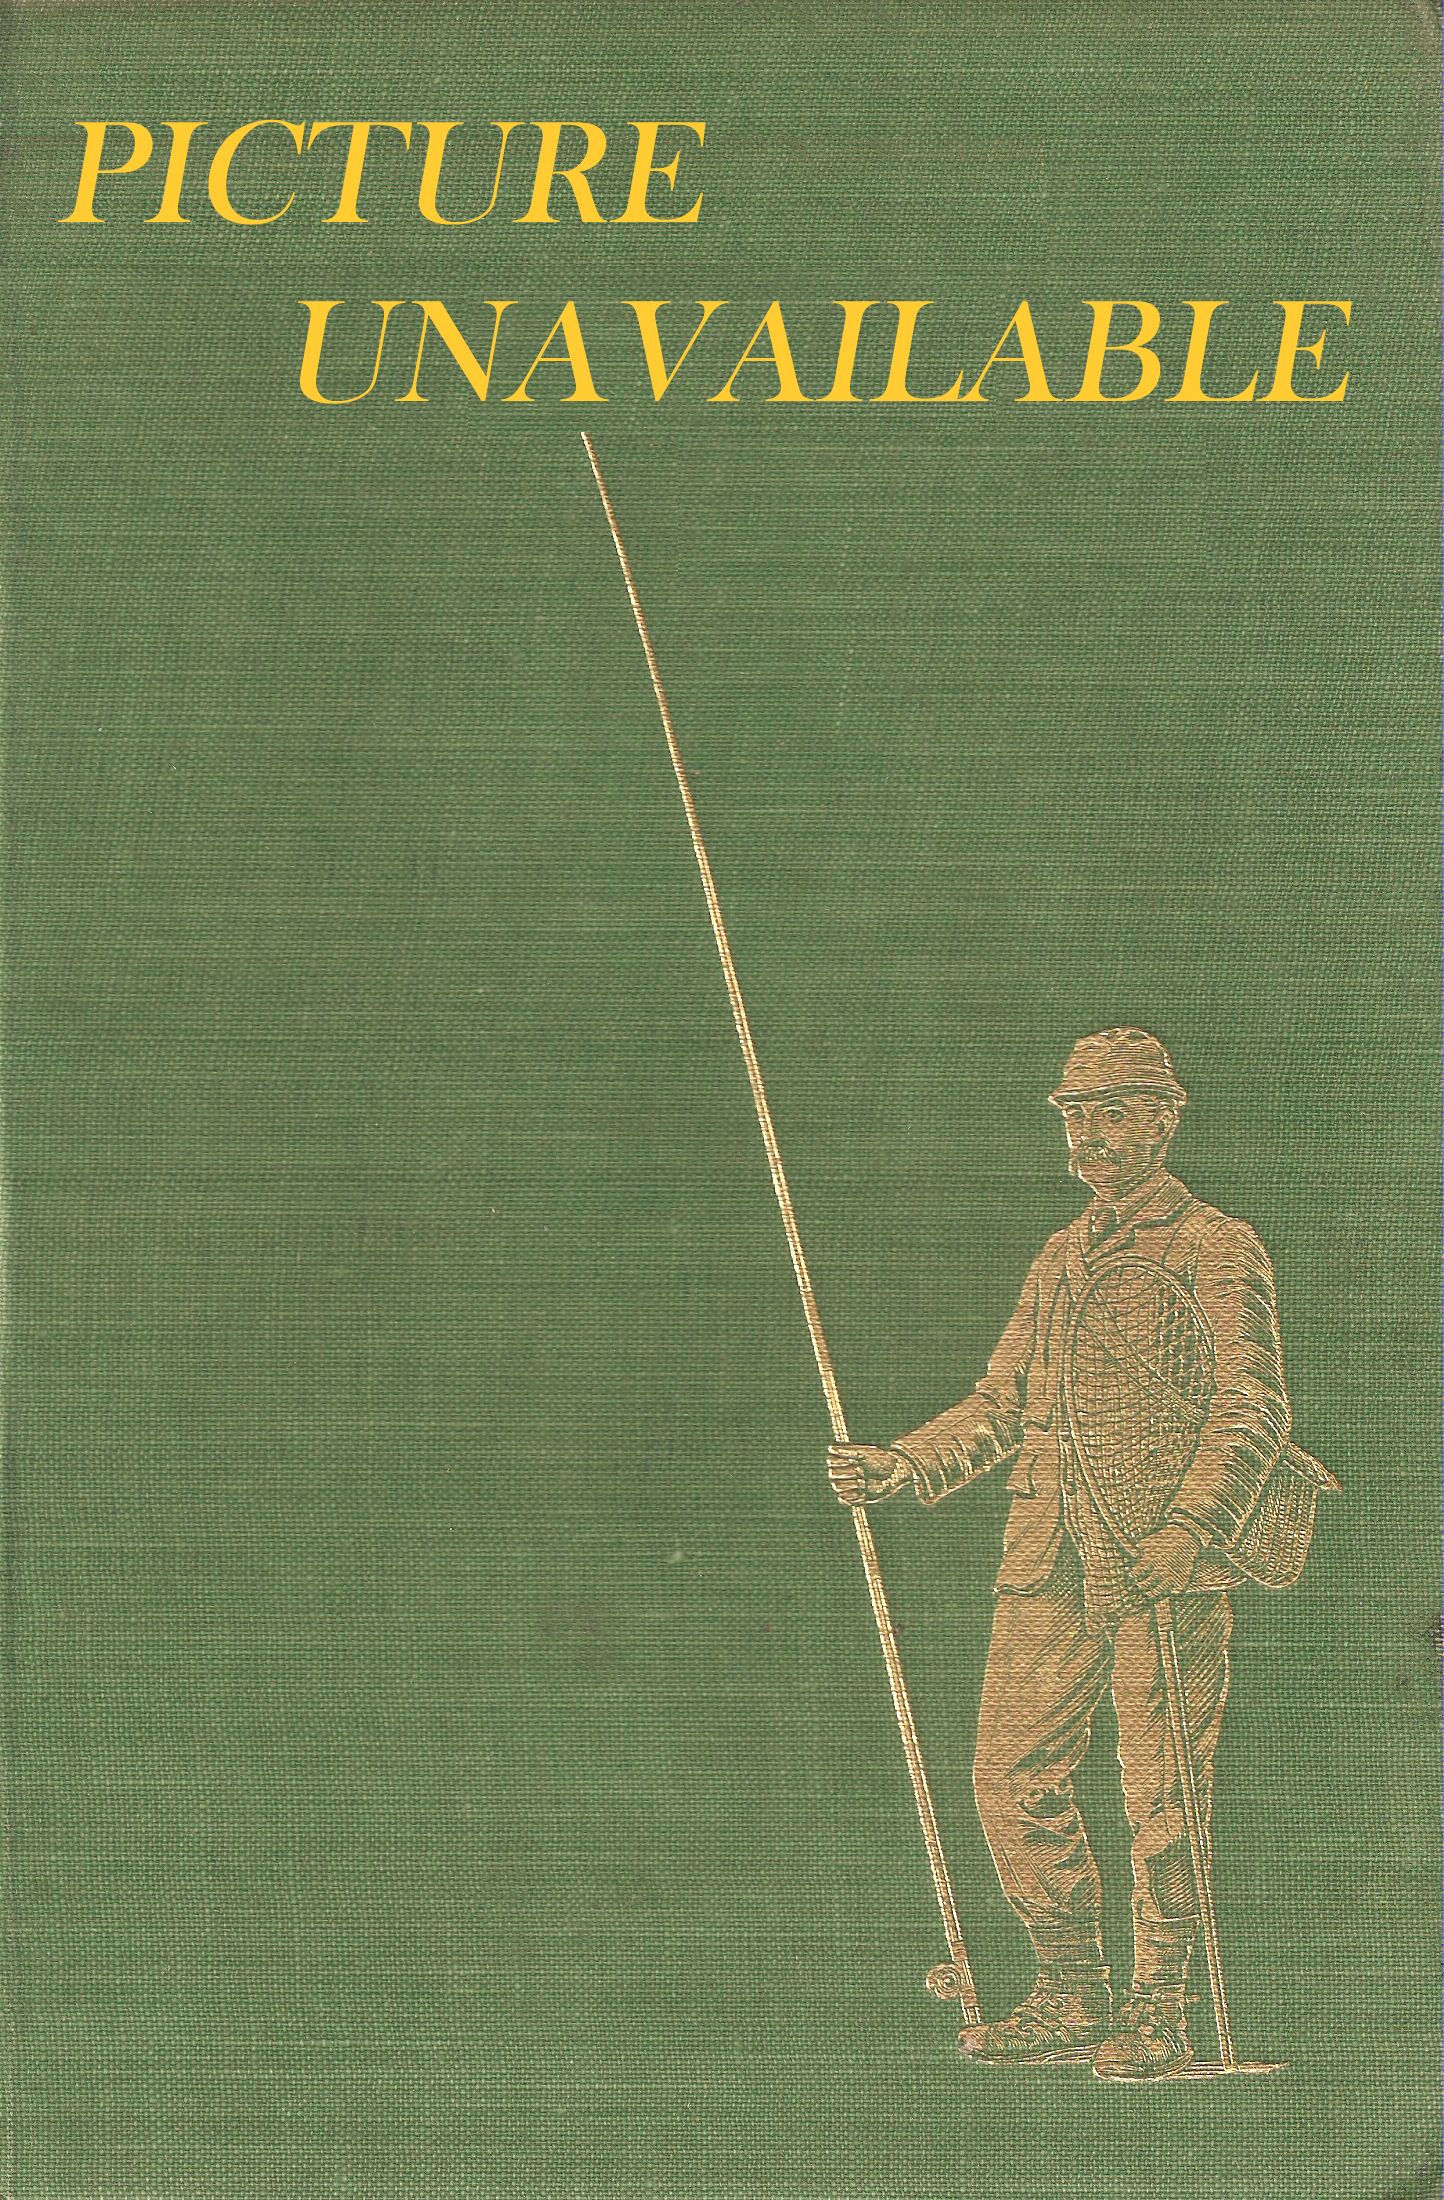 THE SALMONIDAE OF WESTMORLAND: ANGLING REMINISCENCES AND LEAVES FROM AN ANGLER'S NOTEBOOK. By Geo. Foster Braithwaite.